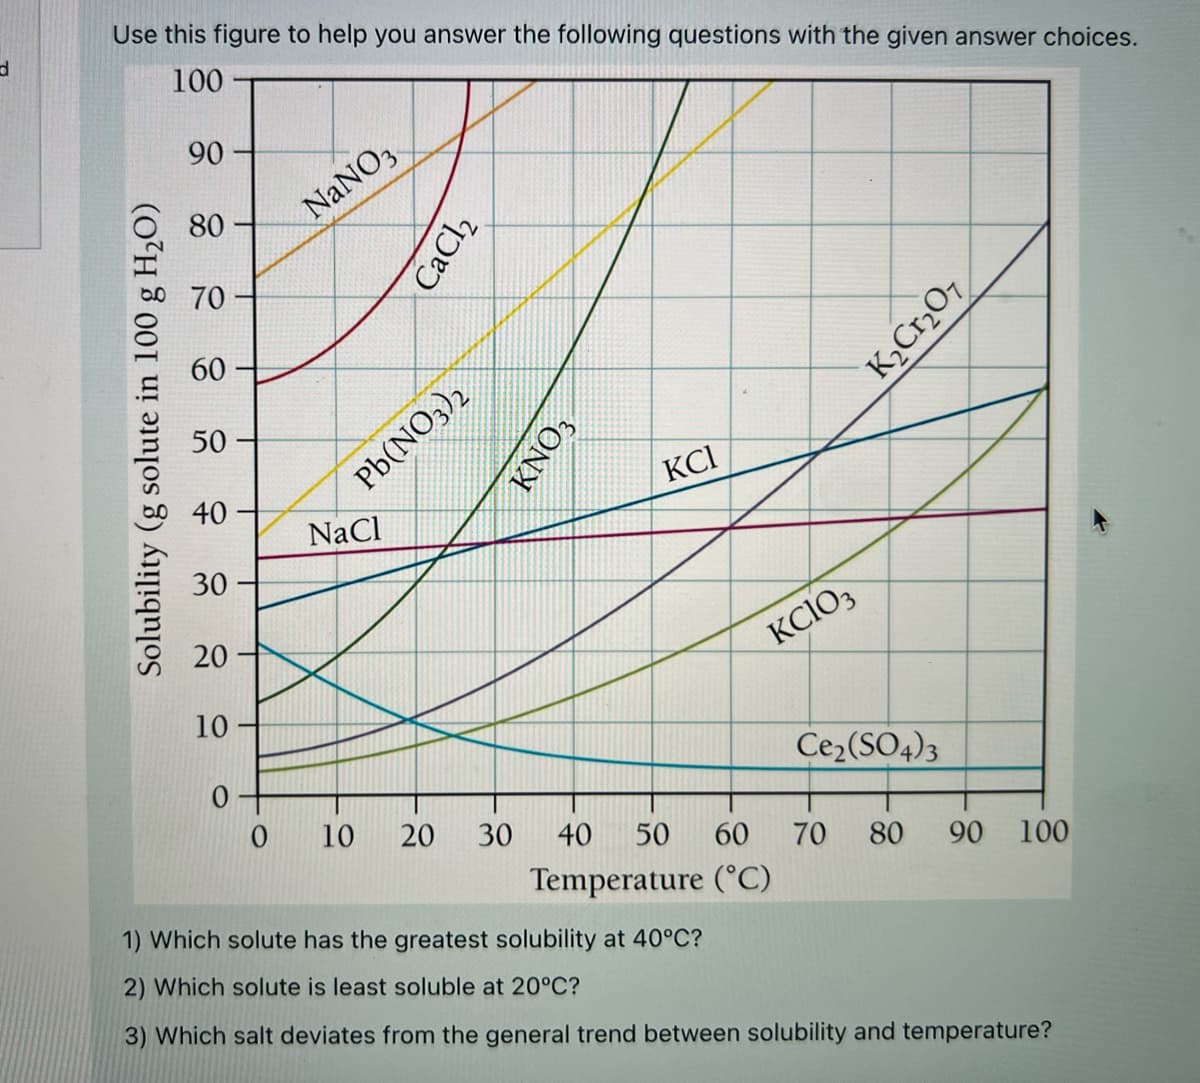 Use this figure to help you answer the following questions with the given answer choices.
100
90
80
NANO,
70
60
50
Pb(NO3)2
KCI
40
NaCl
30
20
KCIO3
10
Ce2(SO4)3
10
20
30
40
50
60
70
Temperature (°C)
1) Which solute has the greatest solubility at 40°C?
80
90 100
2) Which solute is least soluble at 20°C?
3) Which salt deviates from the general trend between solubility and temperature?
Solubility (g solute in 100 g H2O)
CaCl,
KNO,
K2Cr2O7
